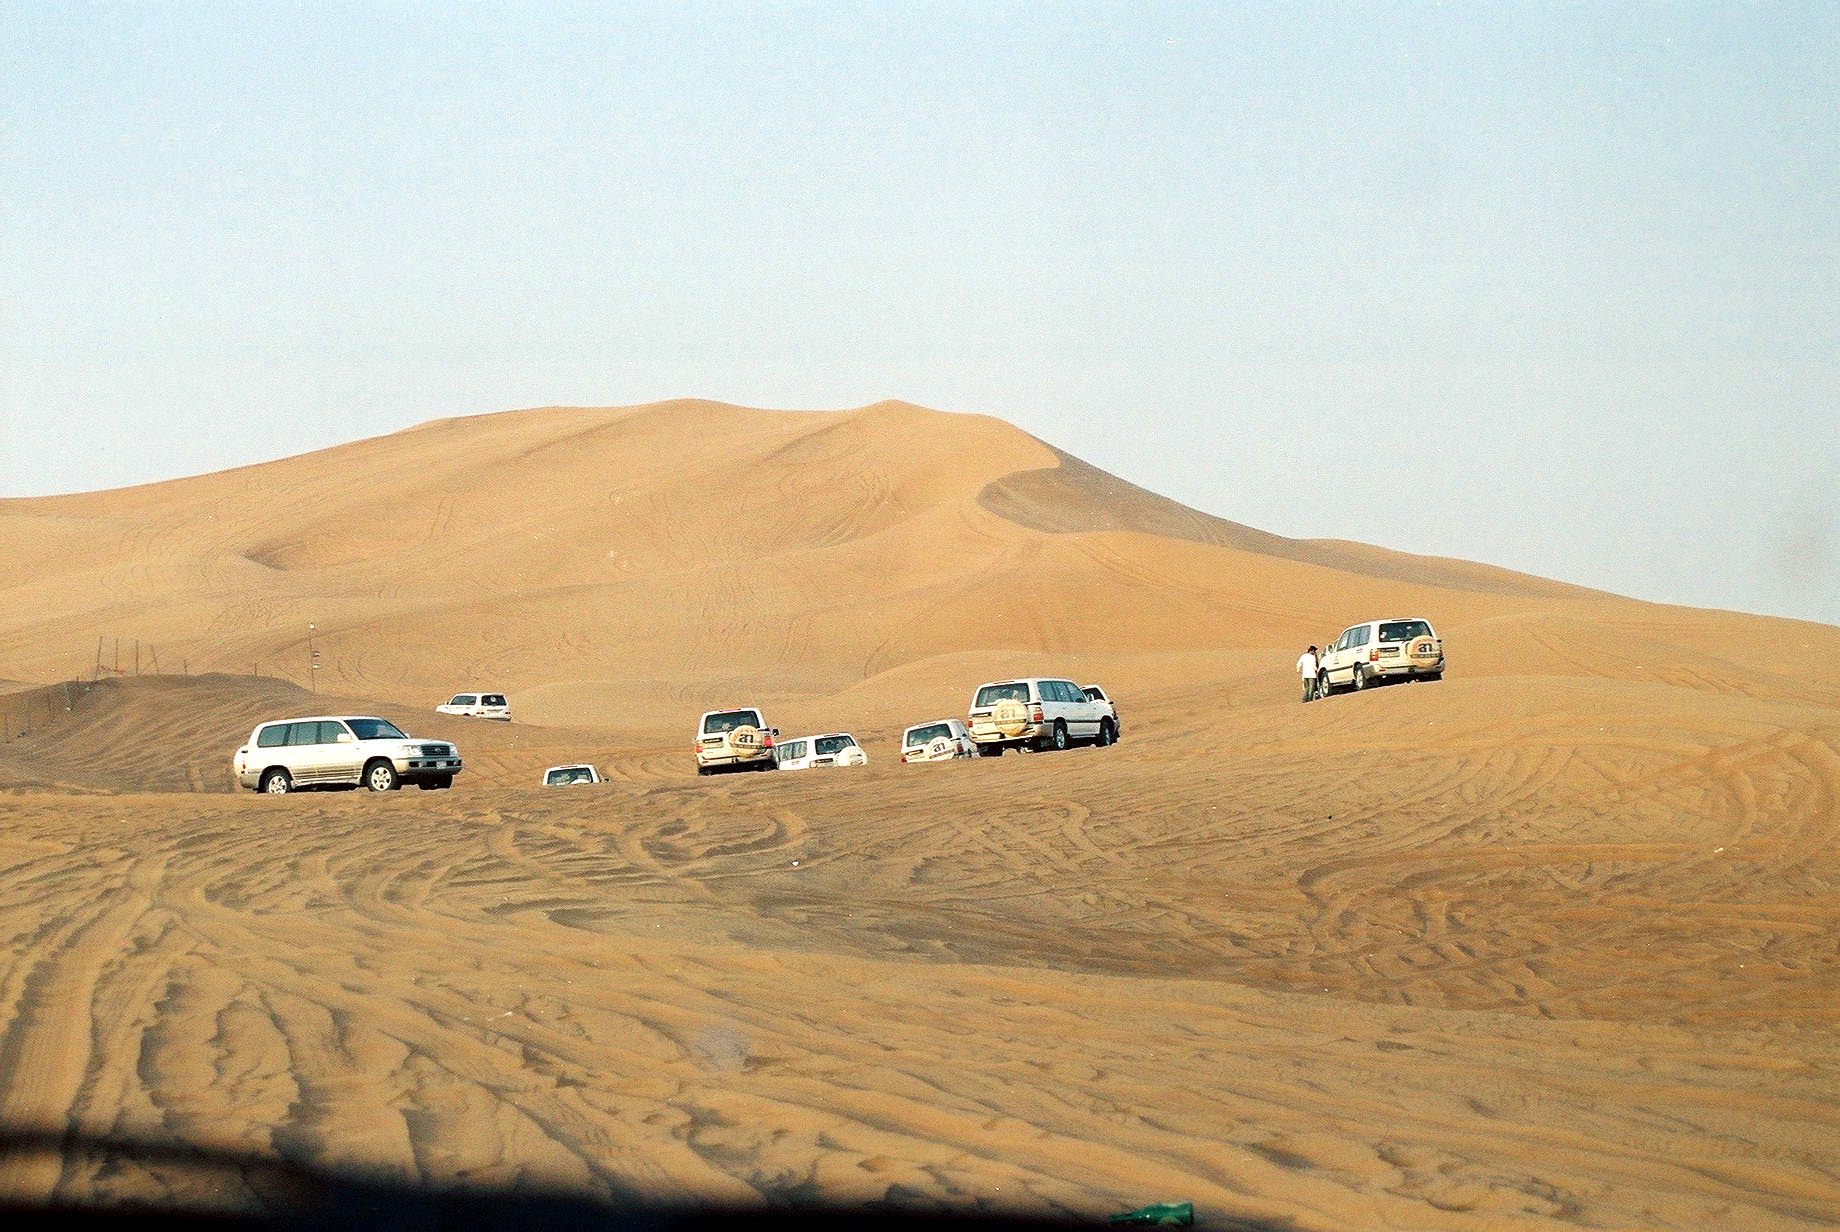 Convoys of land cruisers approaching a big dune